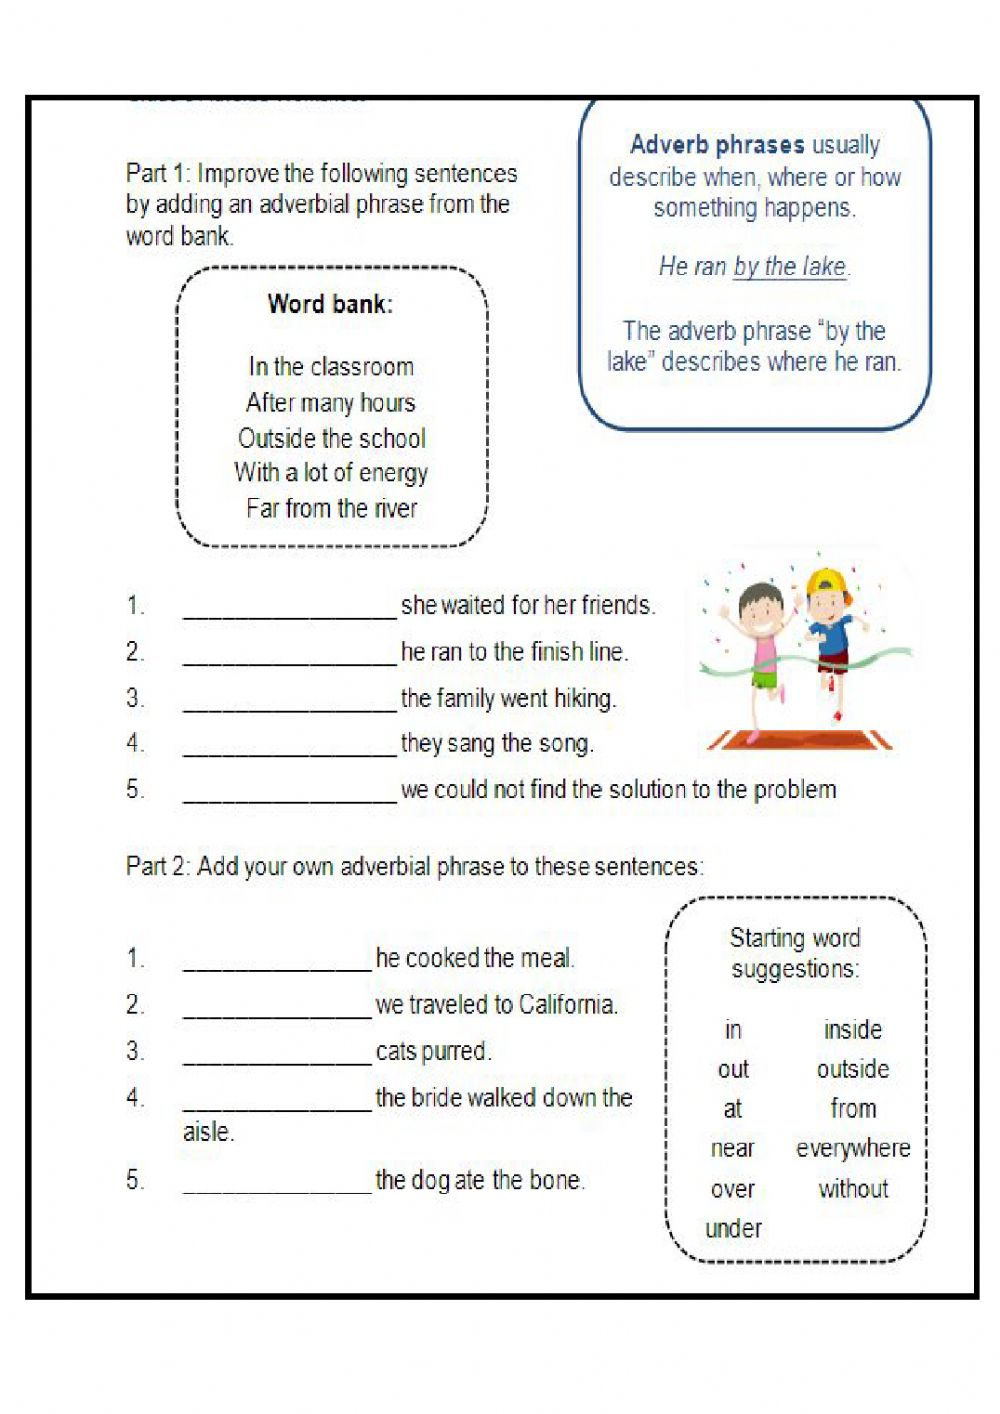 adjective-and-adverb-phrases-worksheet-answers-adverbworksheets